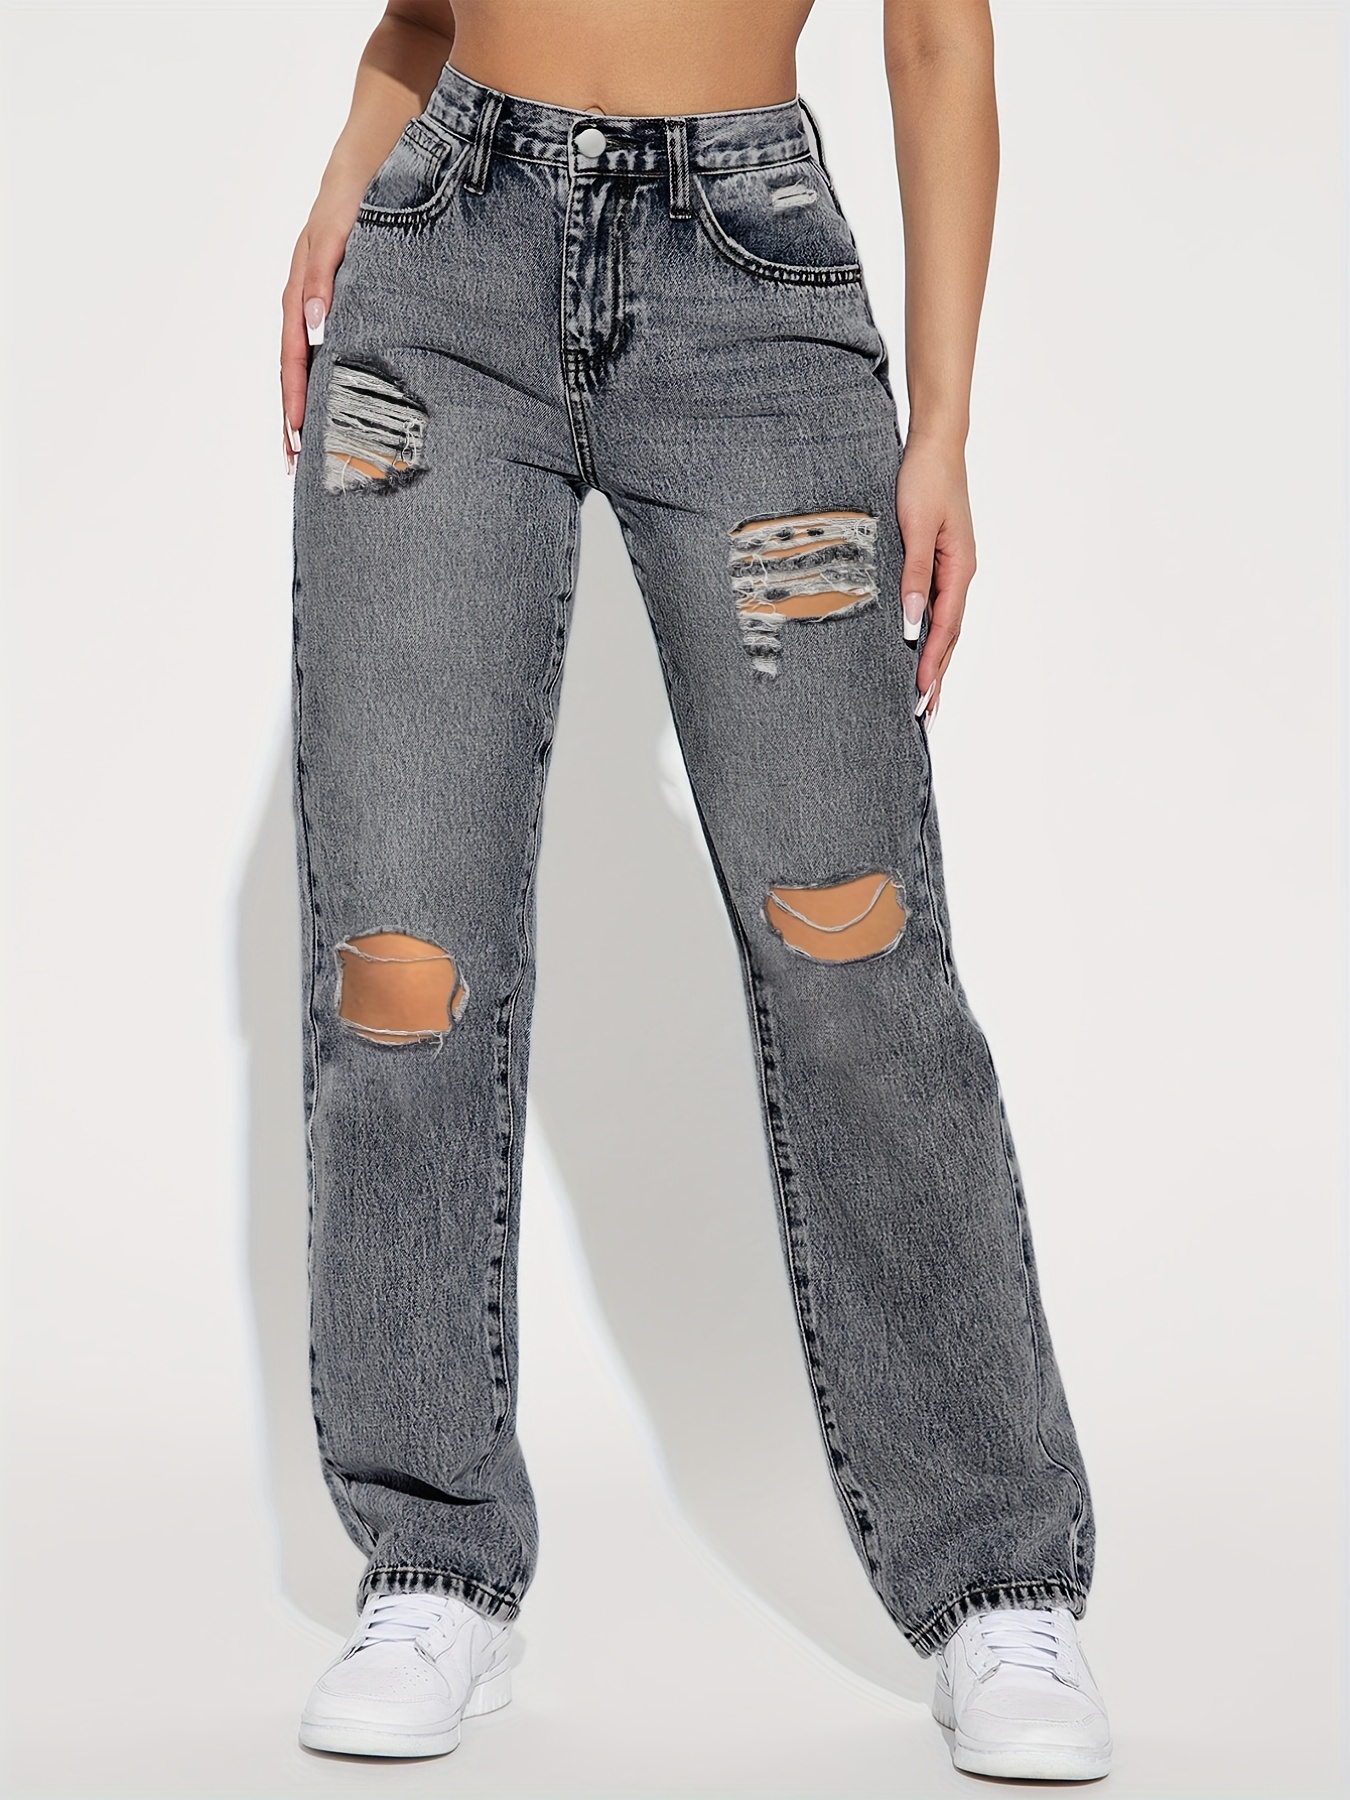 Ripped Distressed High Rise Jeans, Loose Fit Street Style Straight Denim  Pants, Women's Denim Jeans & Clothing